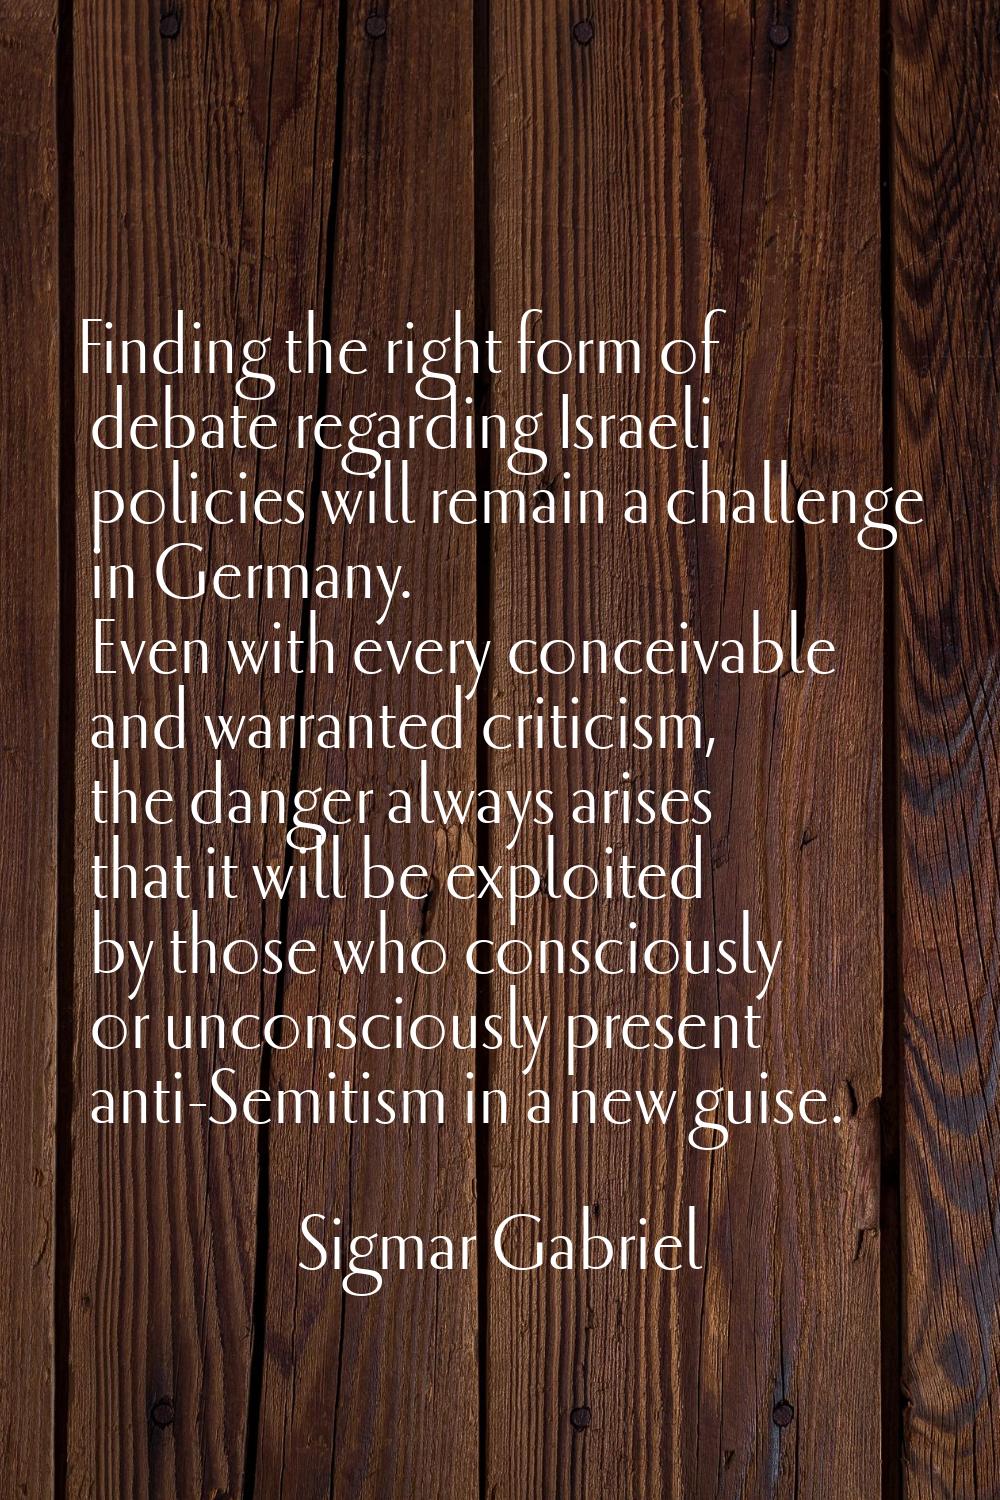 Finding the right form of debate regarding Israeli policies will remain a challenge in Germany. Eve